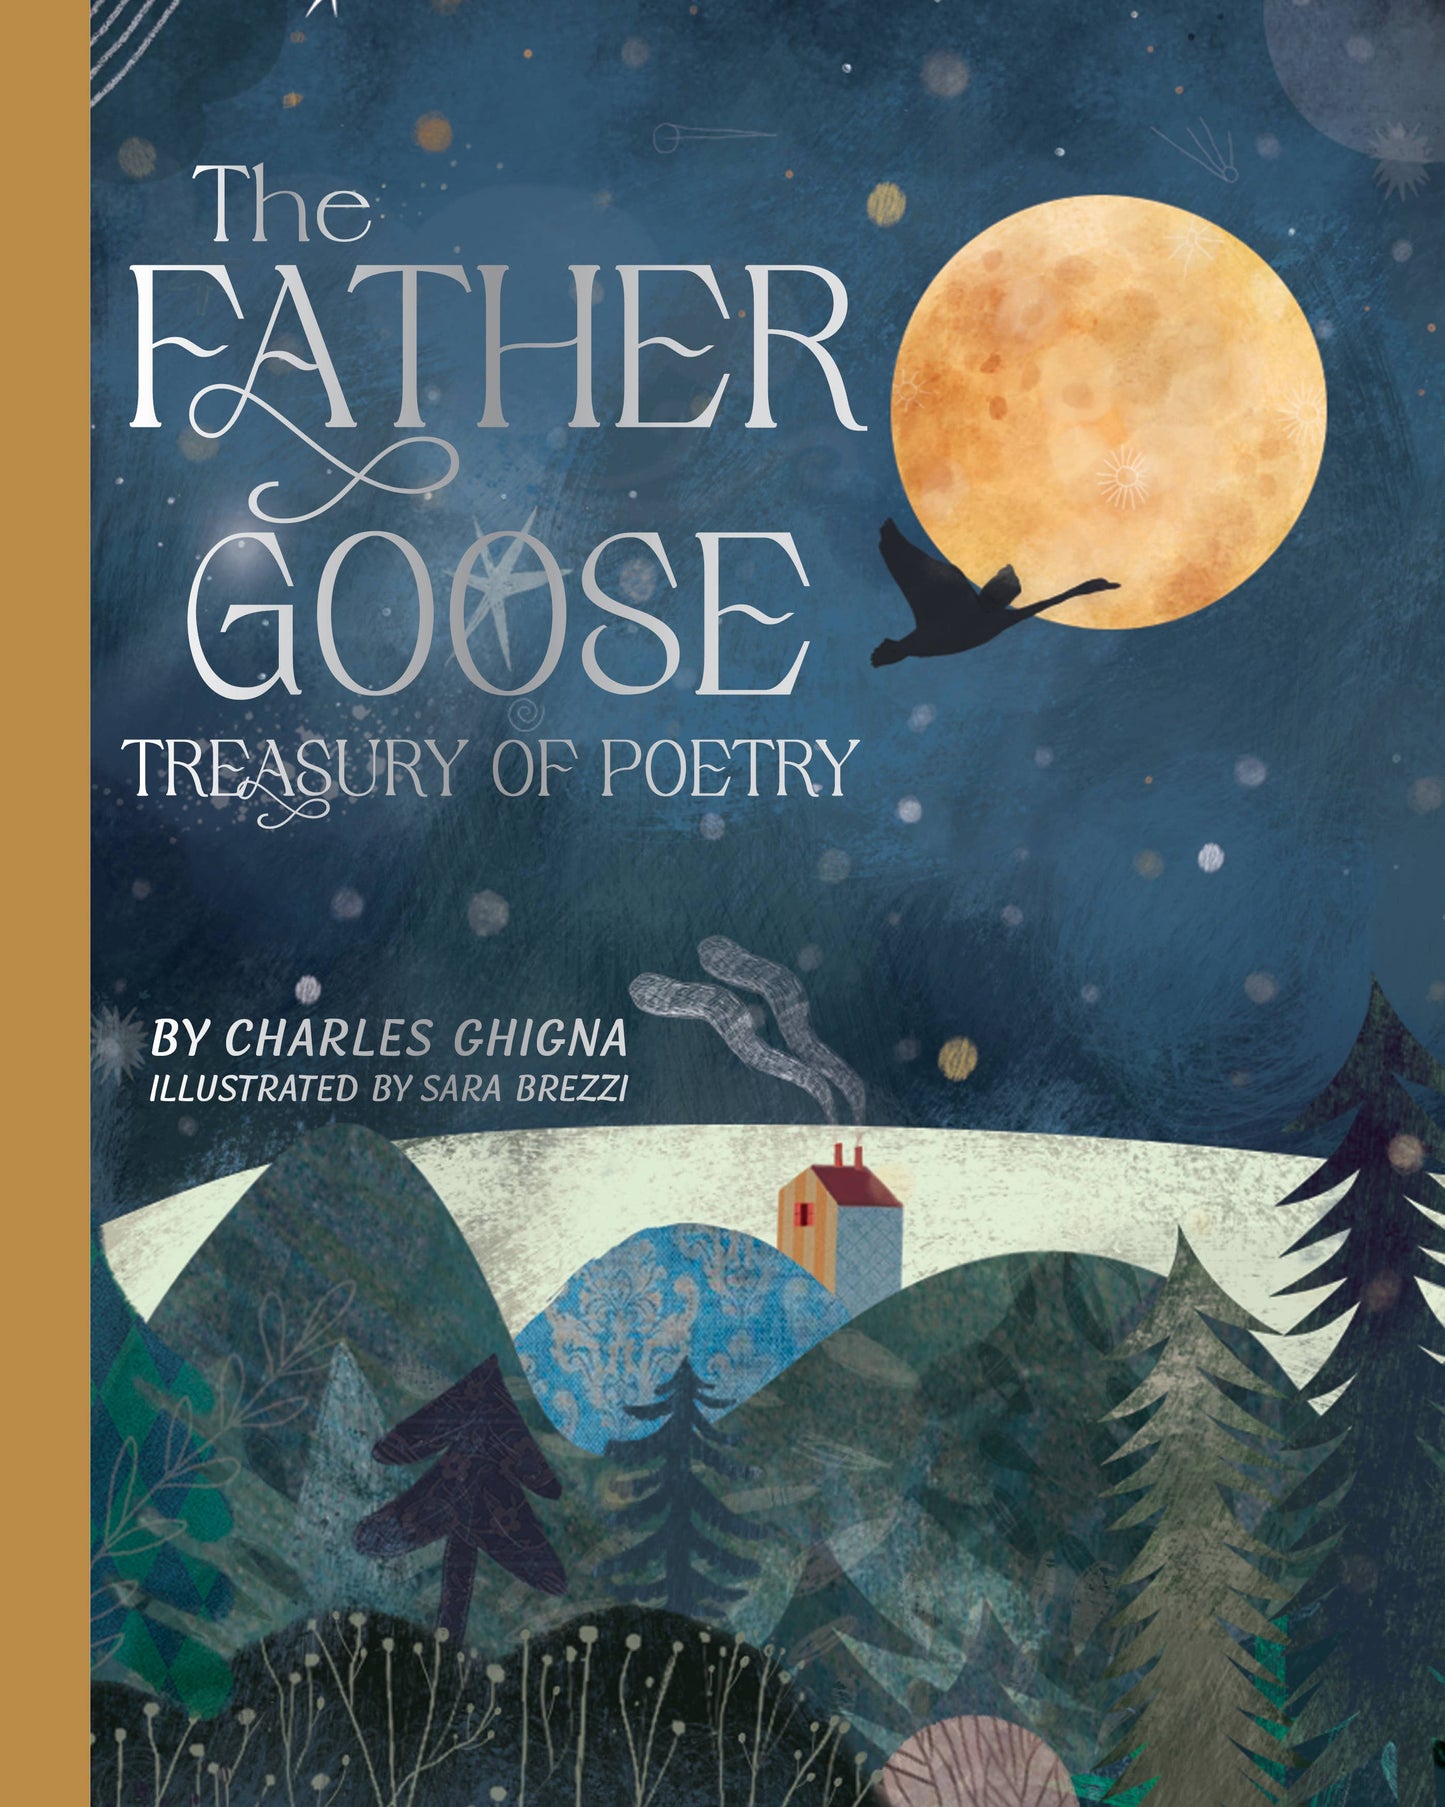 The Father Goose Treasury of Poetry: 101 Favorite Poems